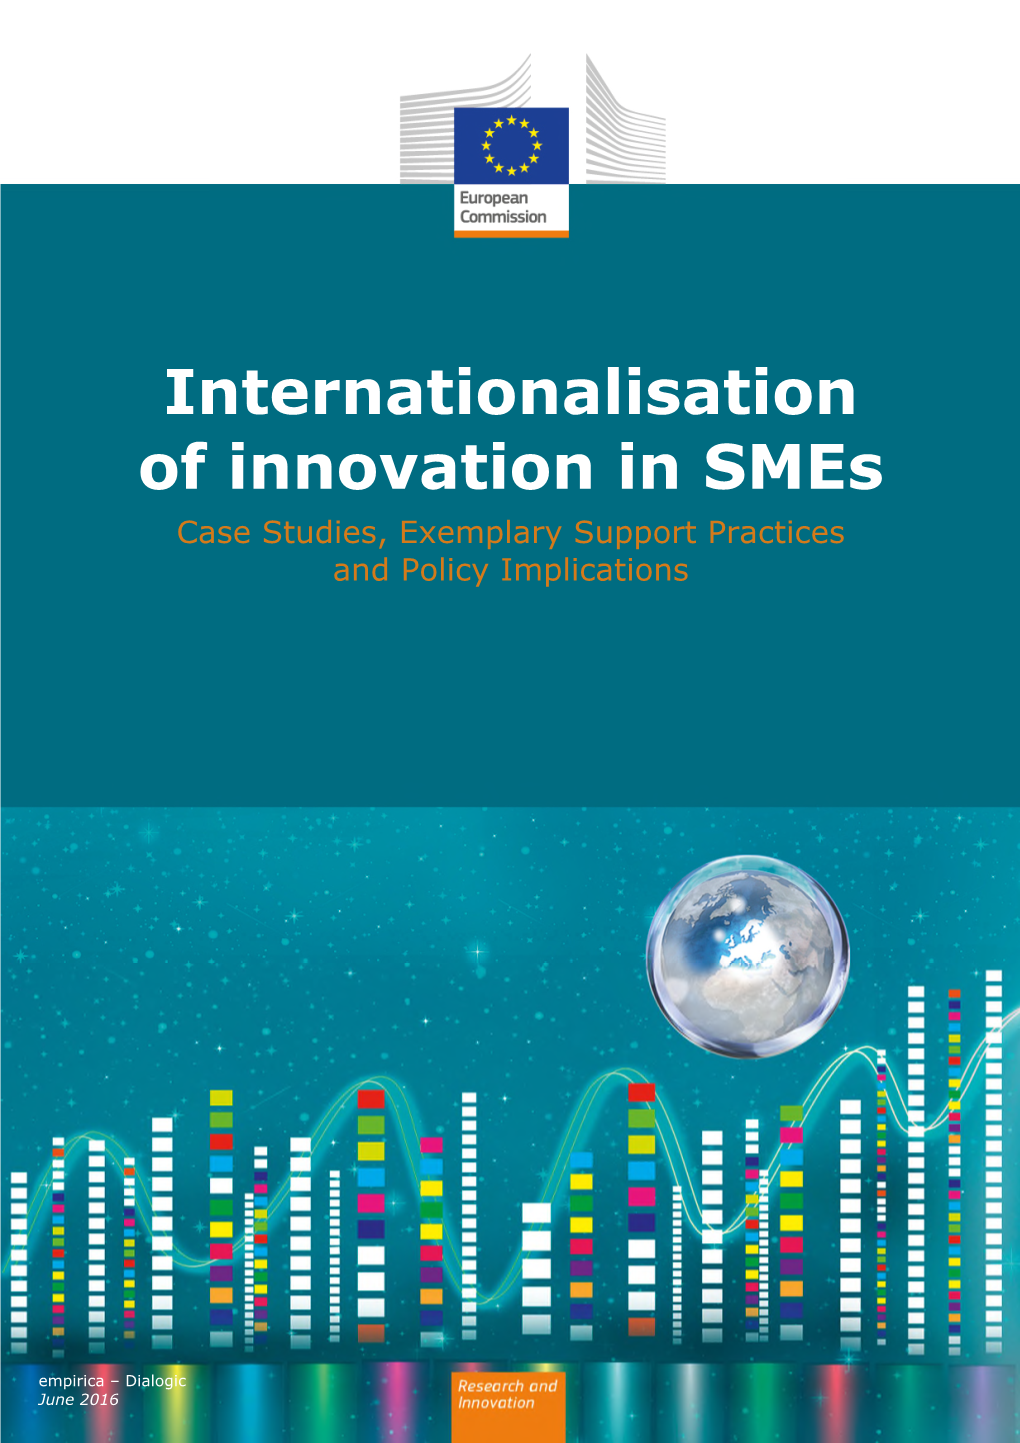 Case Studies, Exemplary Support Practices and Policy Implications